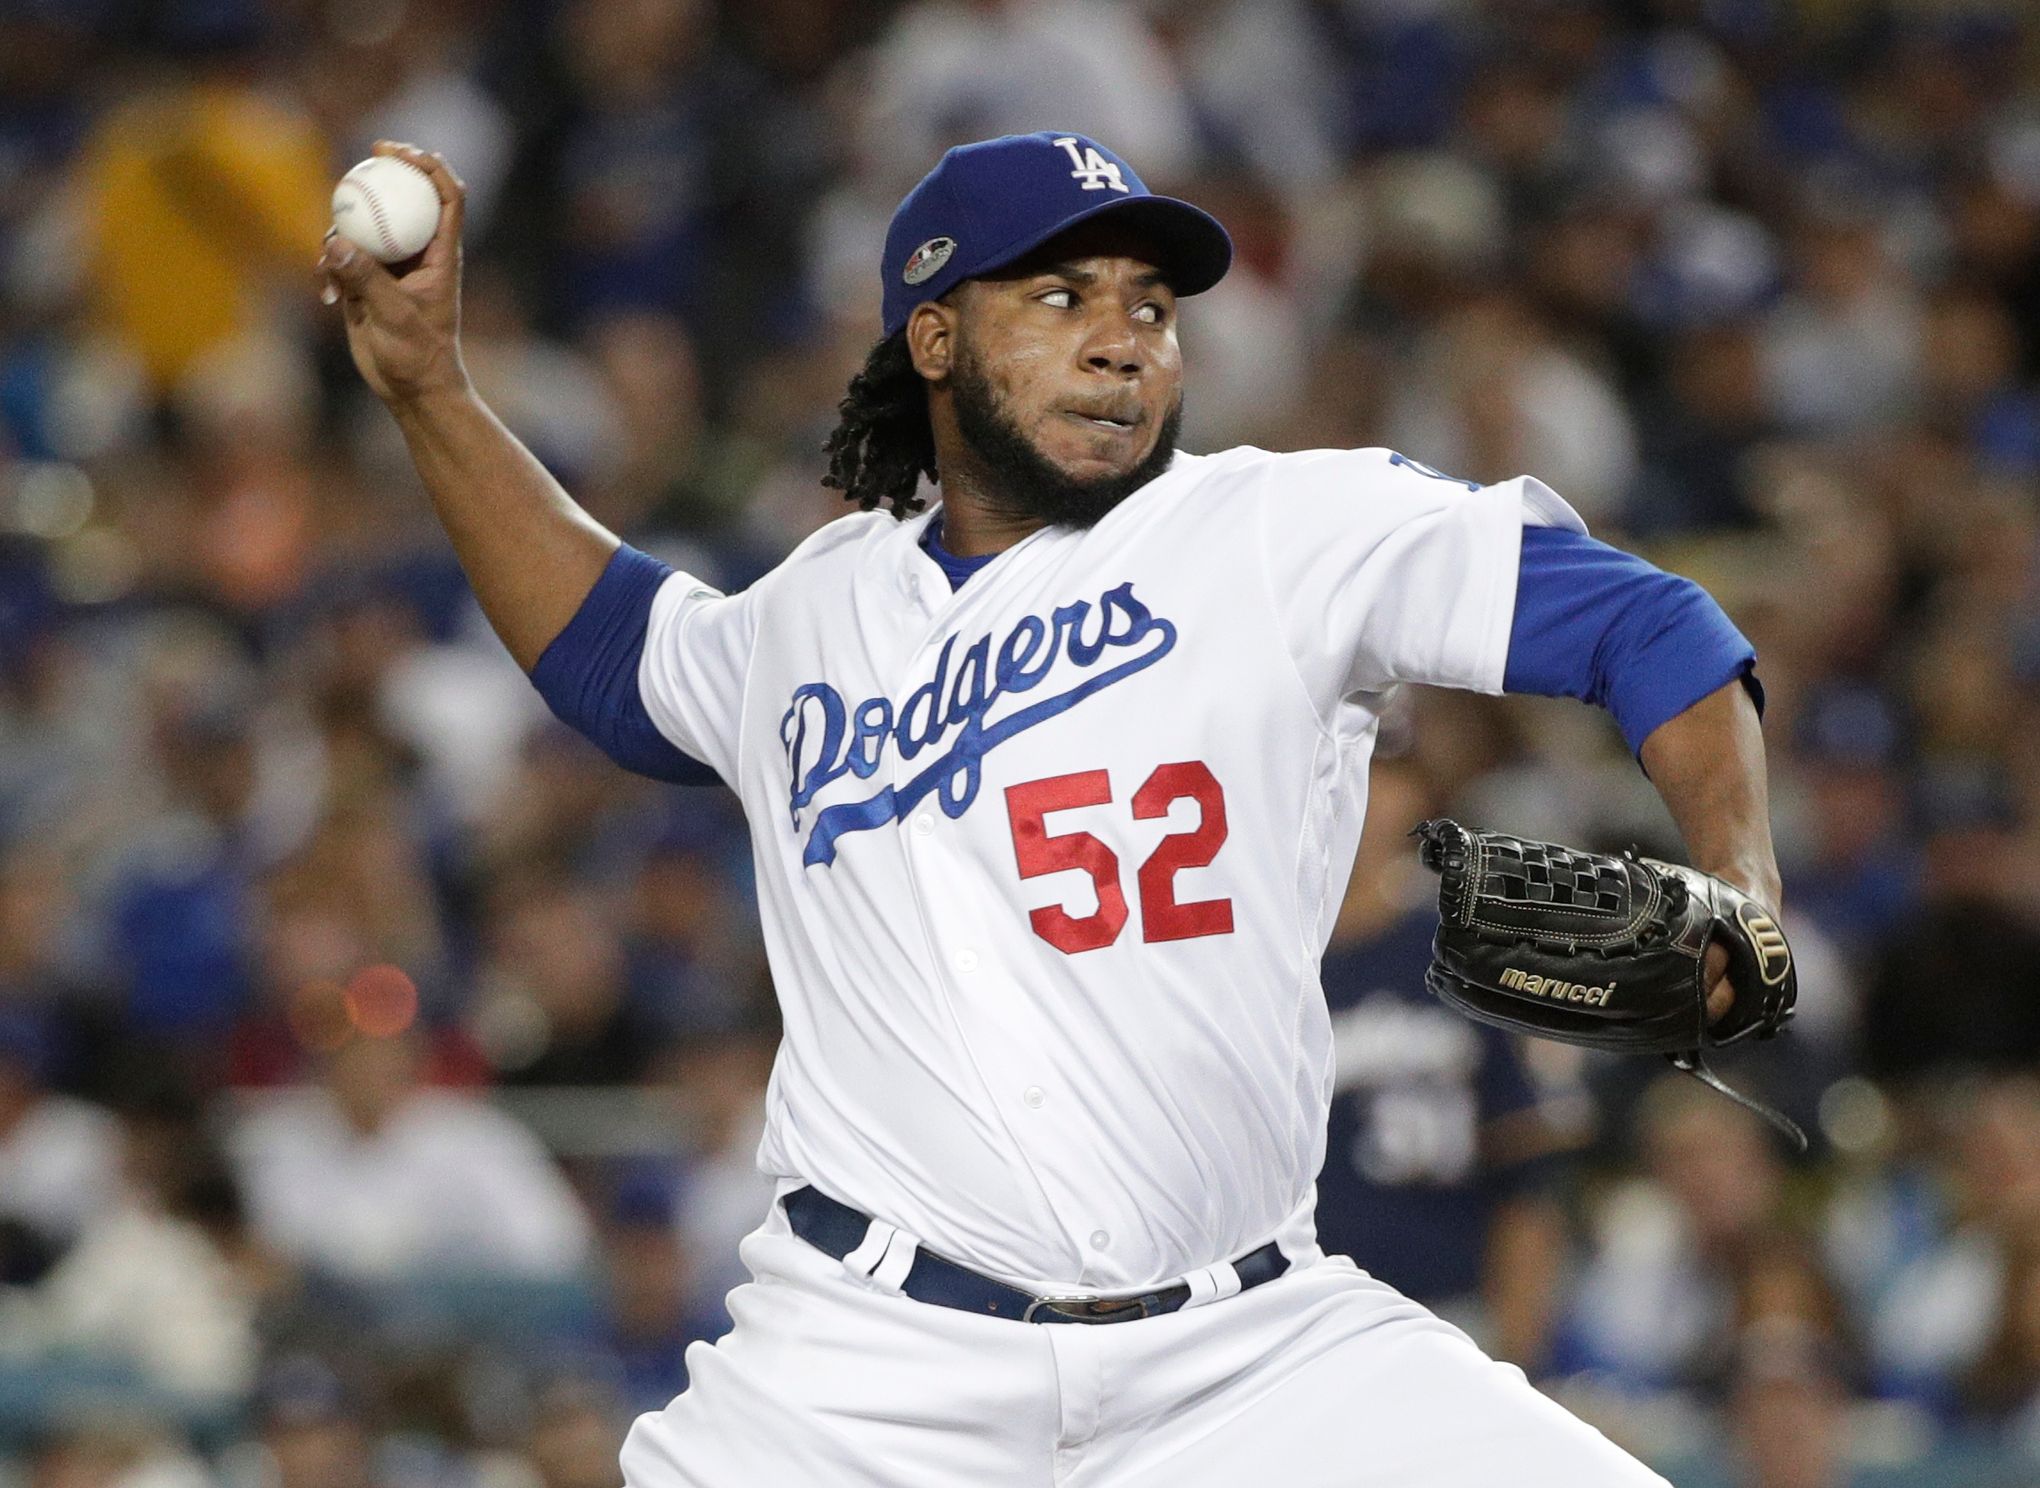 Pedro Baez avoids salary arbitration with reported 1-year, $1.5 million  contract with Dodgers - True Blue LA